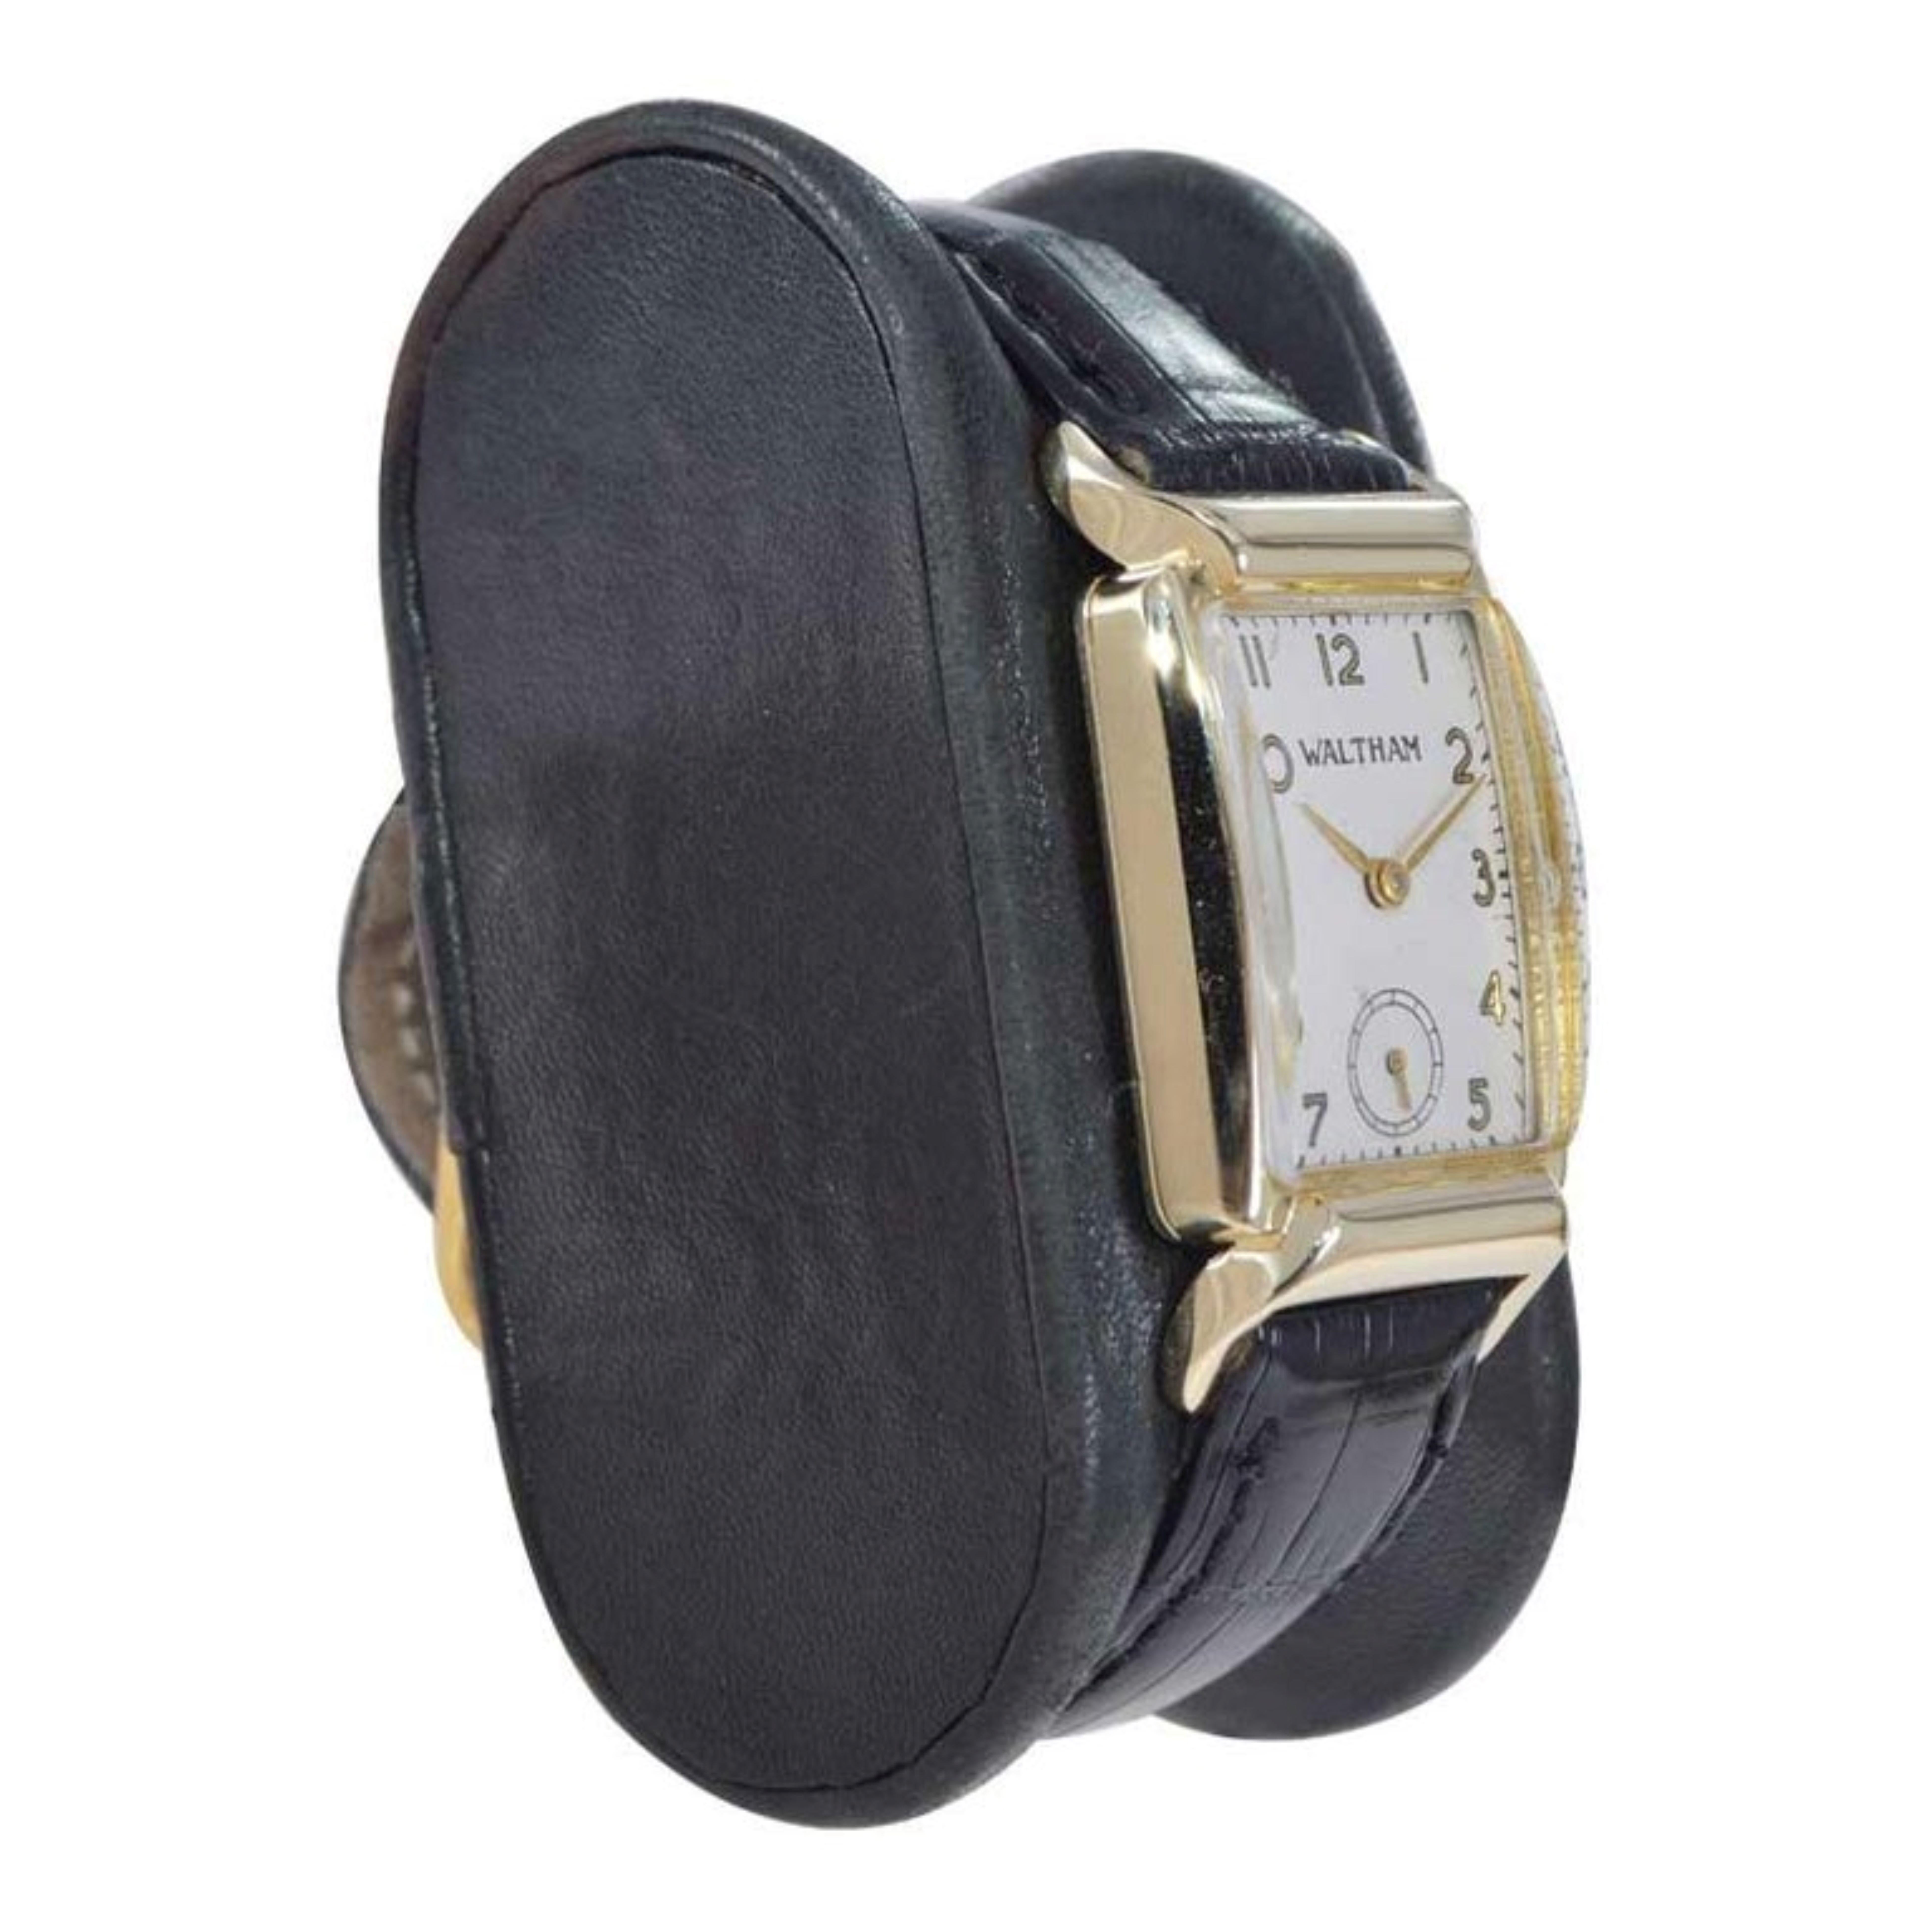 FACTORY / HOUSE: Waltham Watch Company
STYLE / REFERENCE: Art Deco / Tank Style
METAL / MATERIAL: 14Kt Solid Gold 
CIRCA / YEAR: 1940's
DIMENSIONS / SIZE: Length 38mm x Width 21mm
MOVEMENT / CALIBER: Manual Winding / 19 Jewels / Caliber 7508
DIAL /